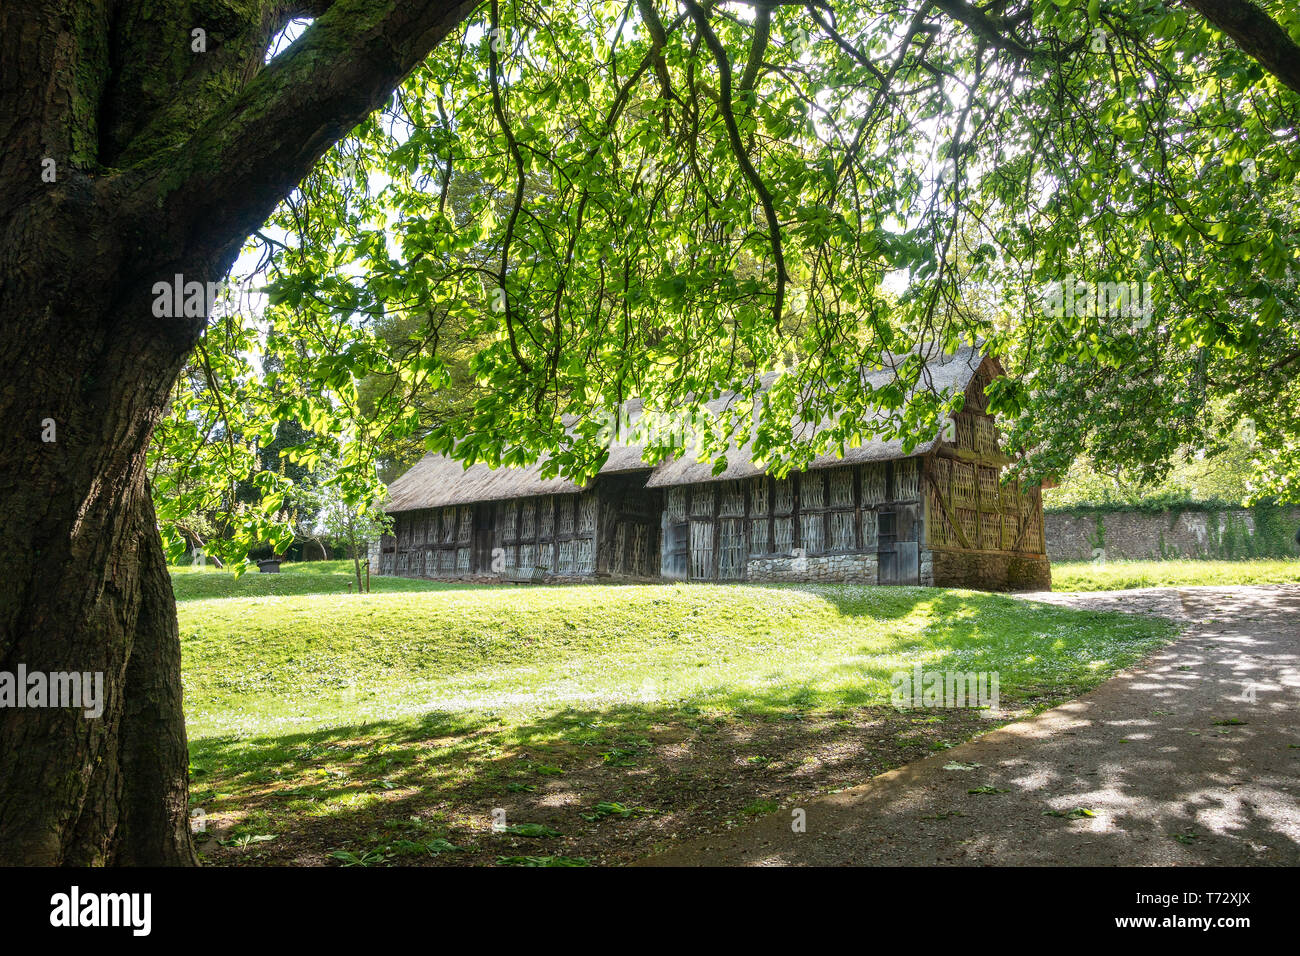 CARDIFF, UK - APRIL 27 : Stryd Lydan Barn at St Fagans National Museum of History in Cardiff on April 27, 2019 Stock Photo